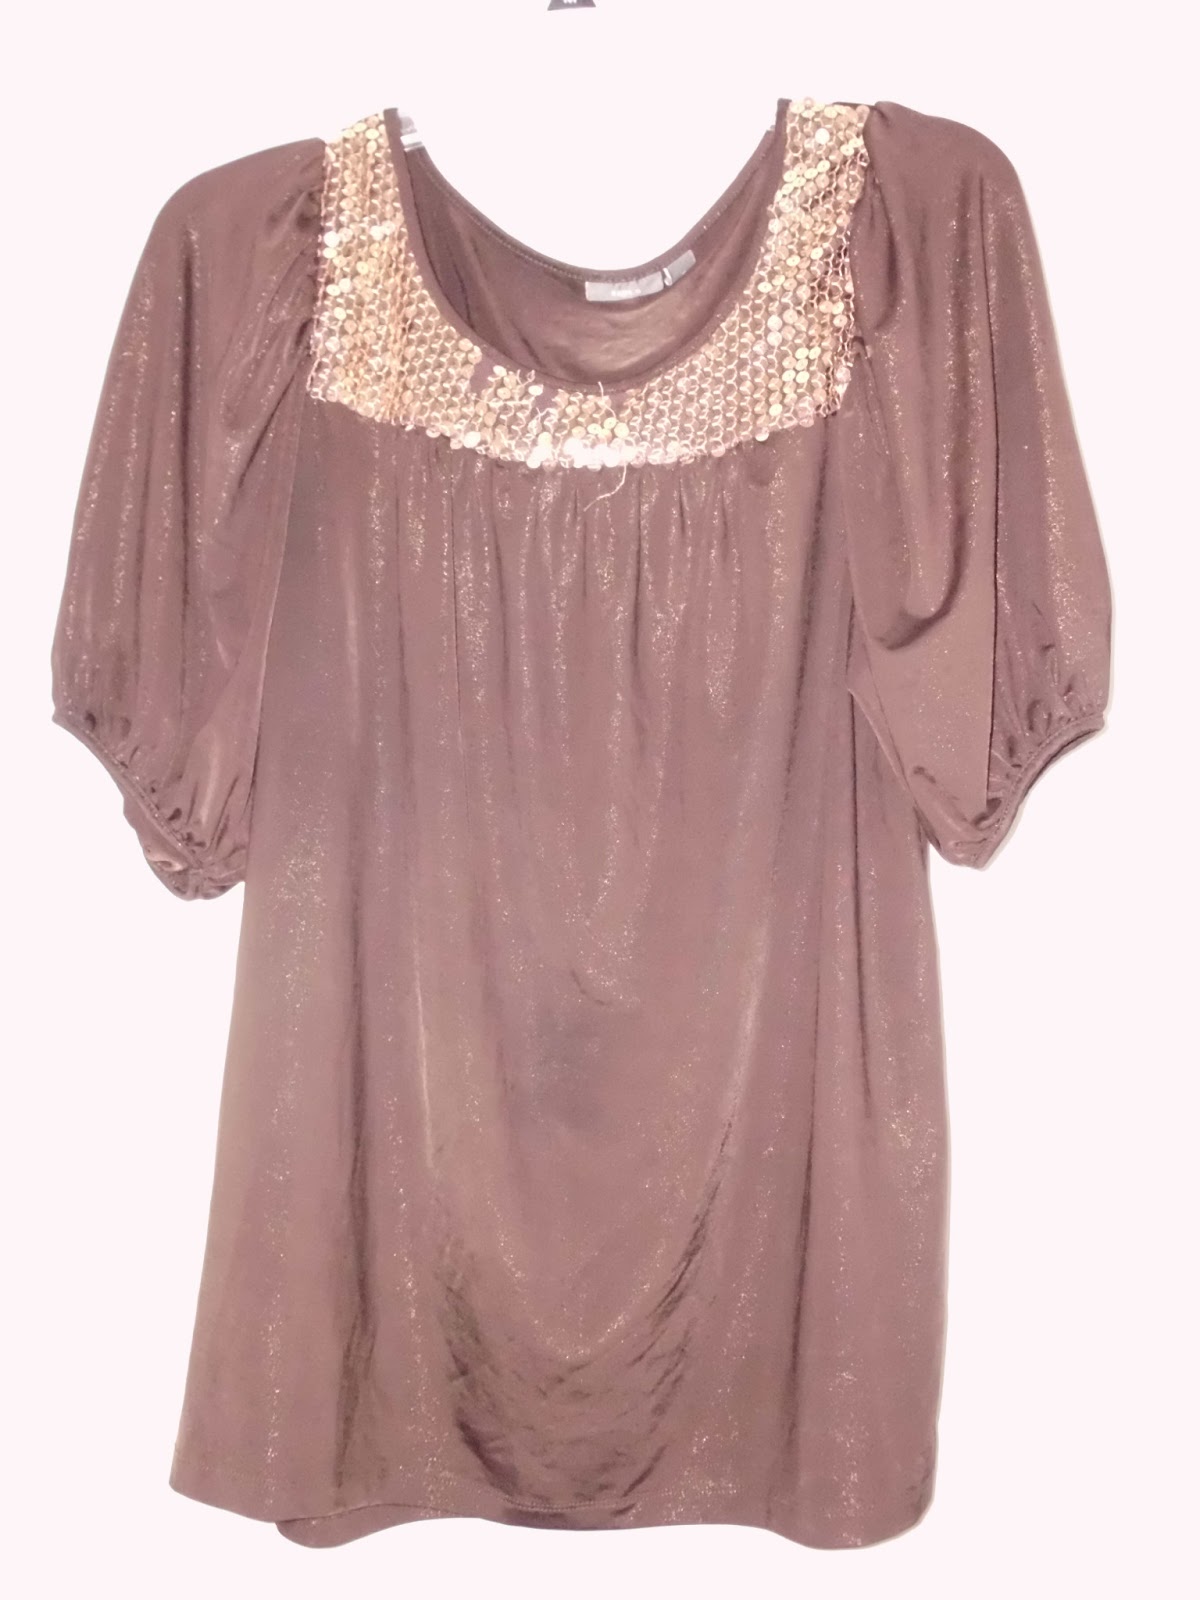 New Dreams for Old Seams: #16: Brown Sequined Shirt